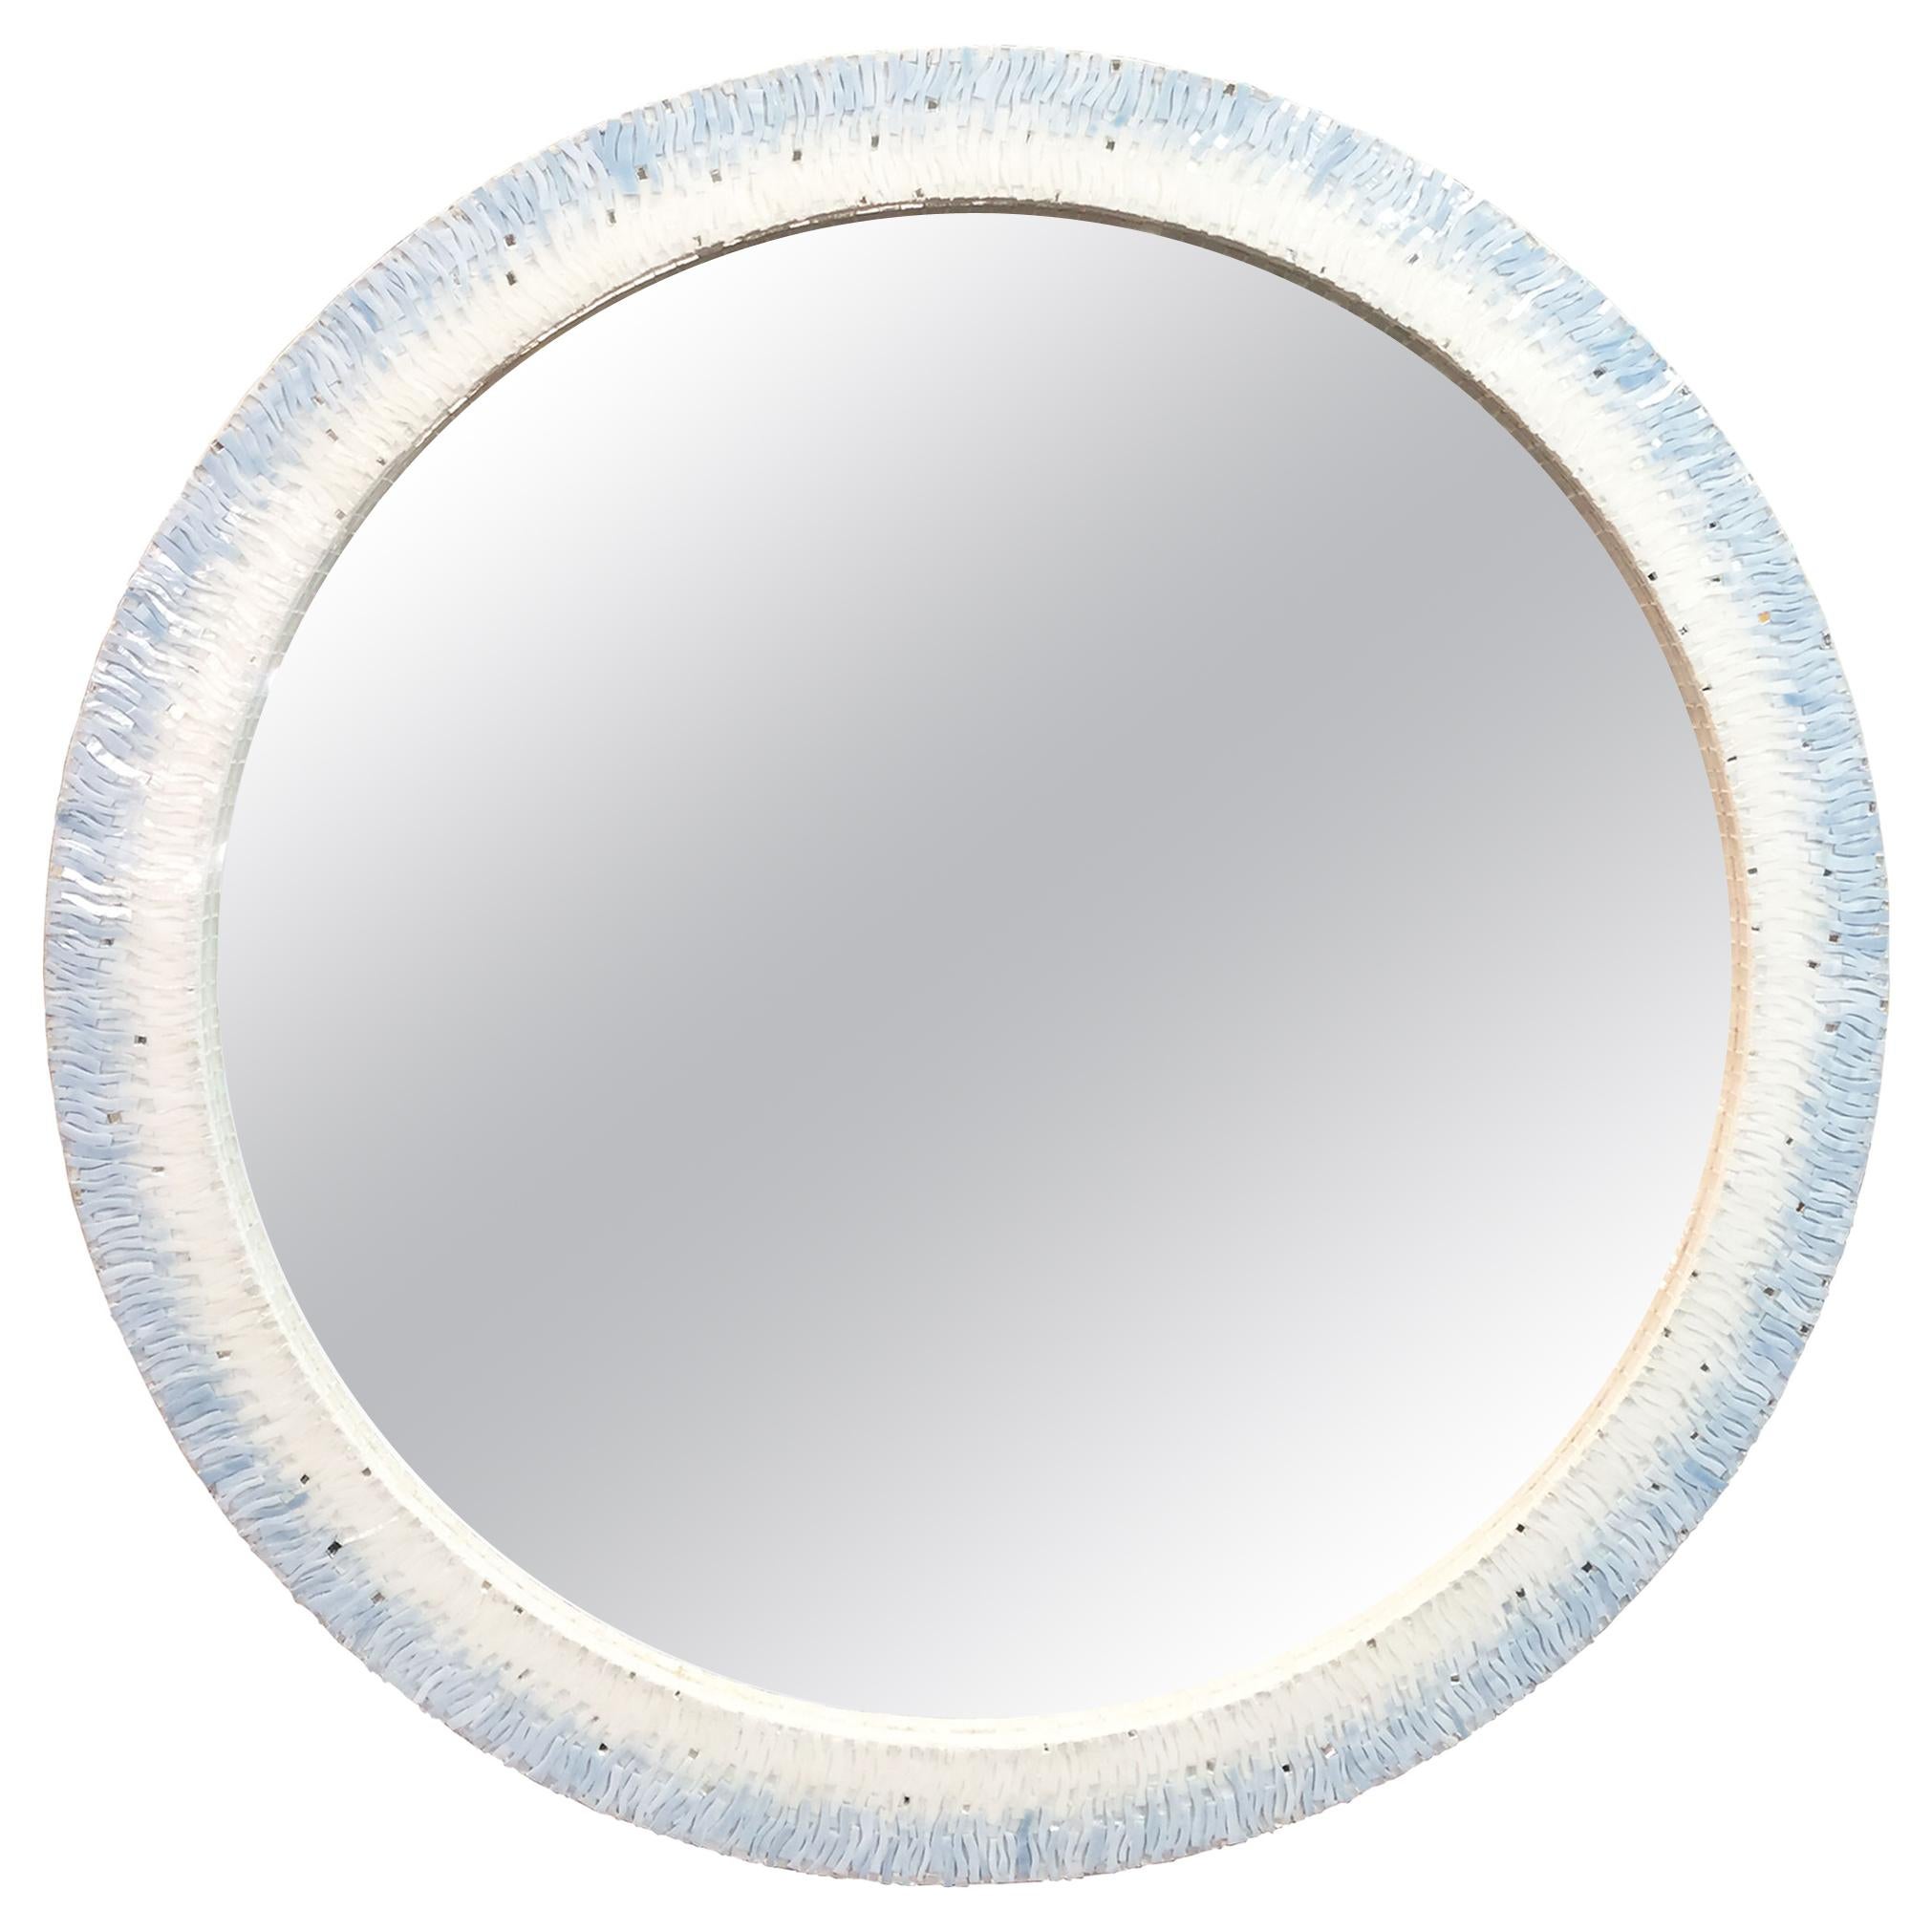 Modern Breara Mosaic Round Mirror with White and Blue Glass by Ercole Home